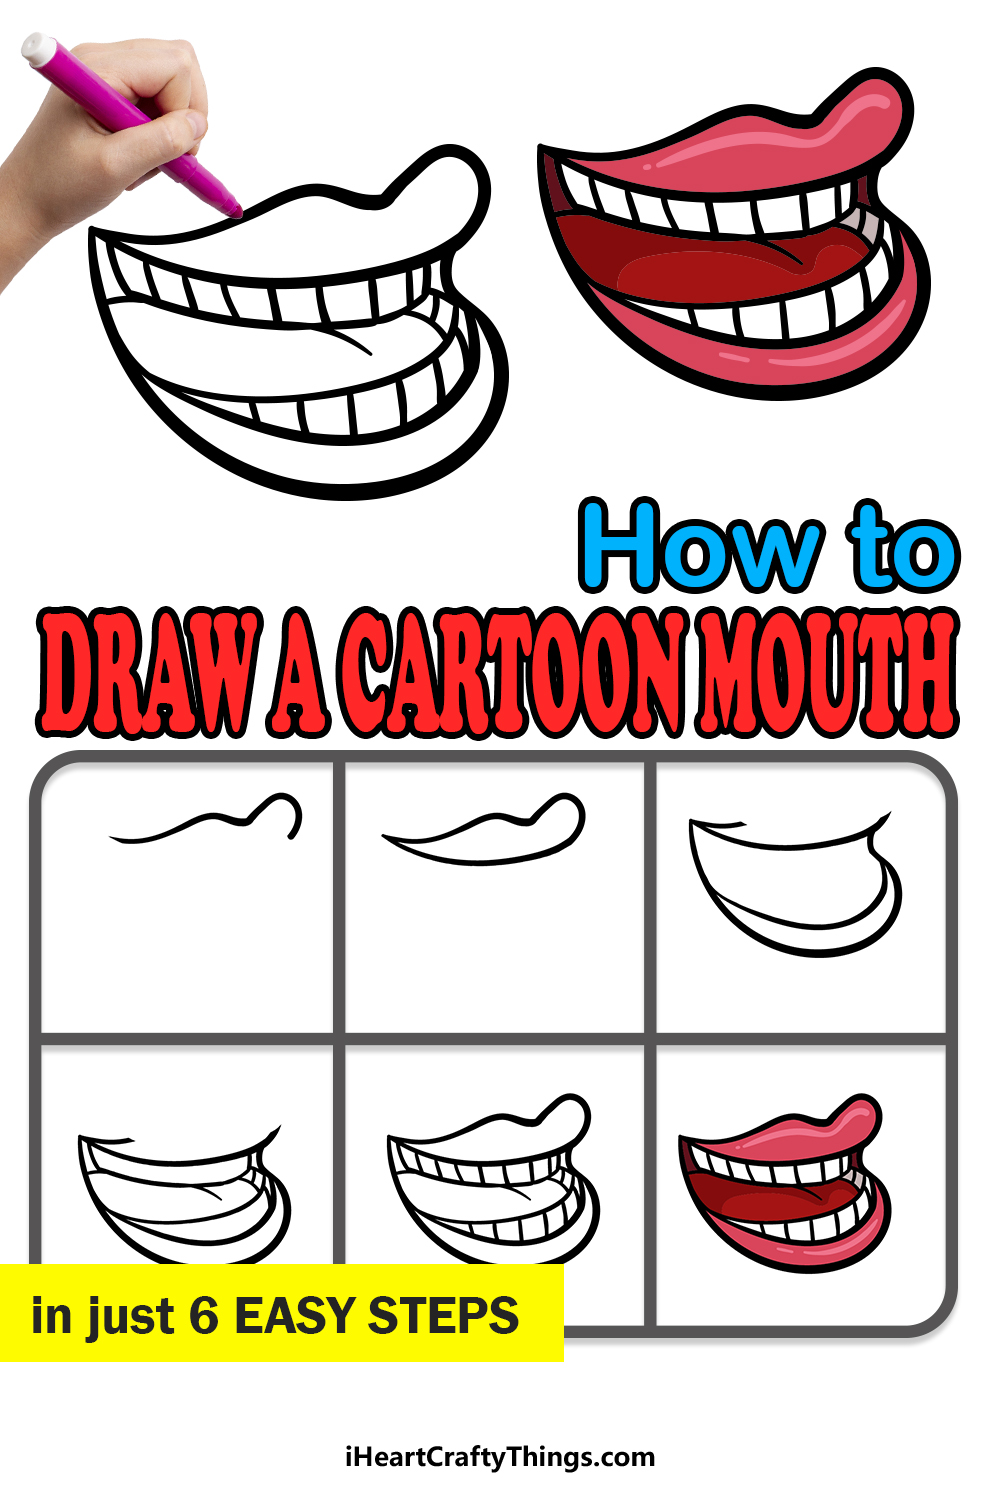 how to draw a cartoon mouth in 6 easy steps